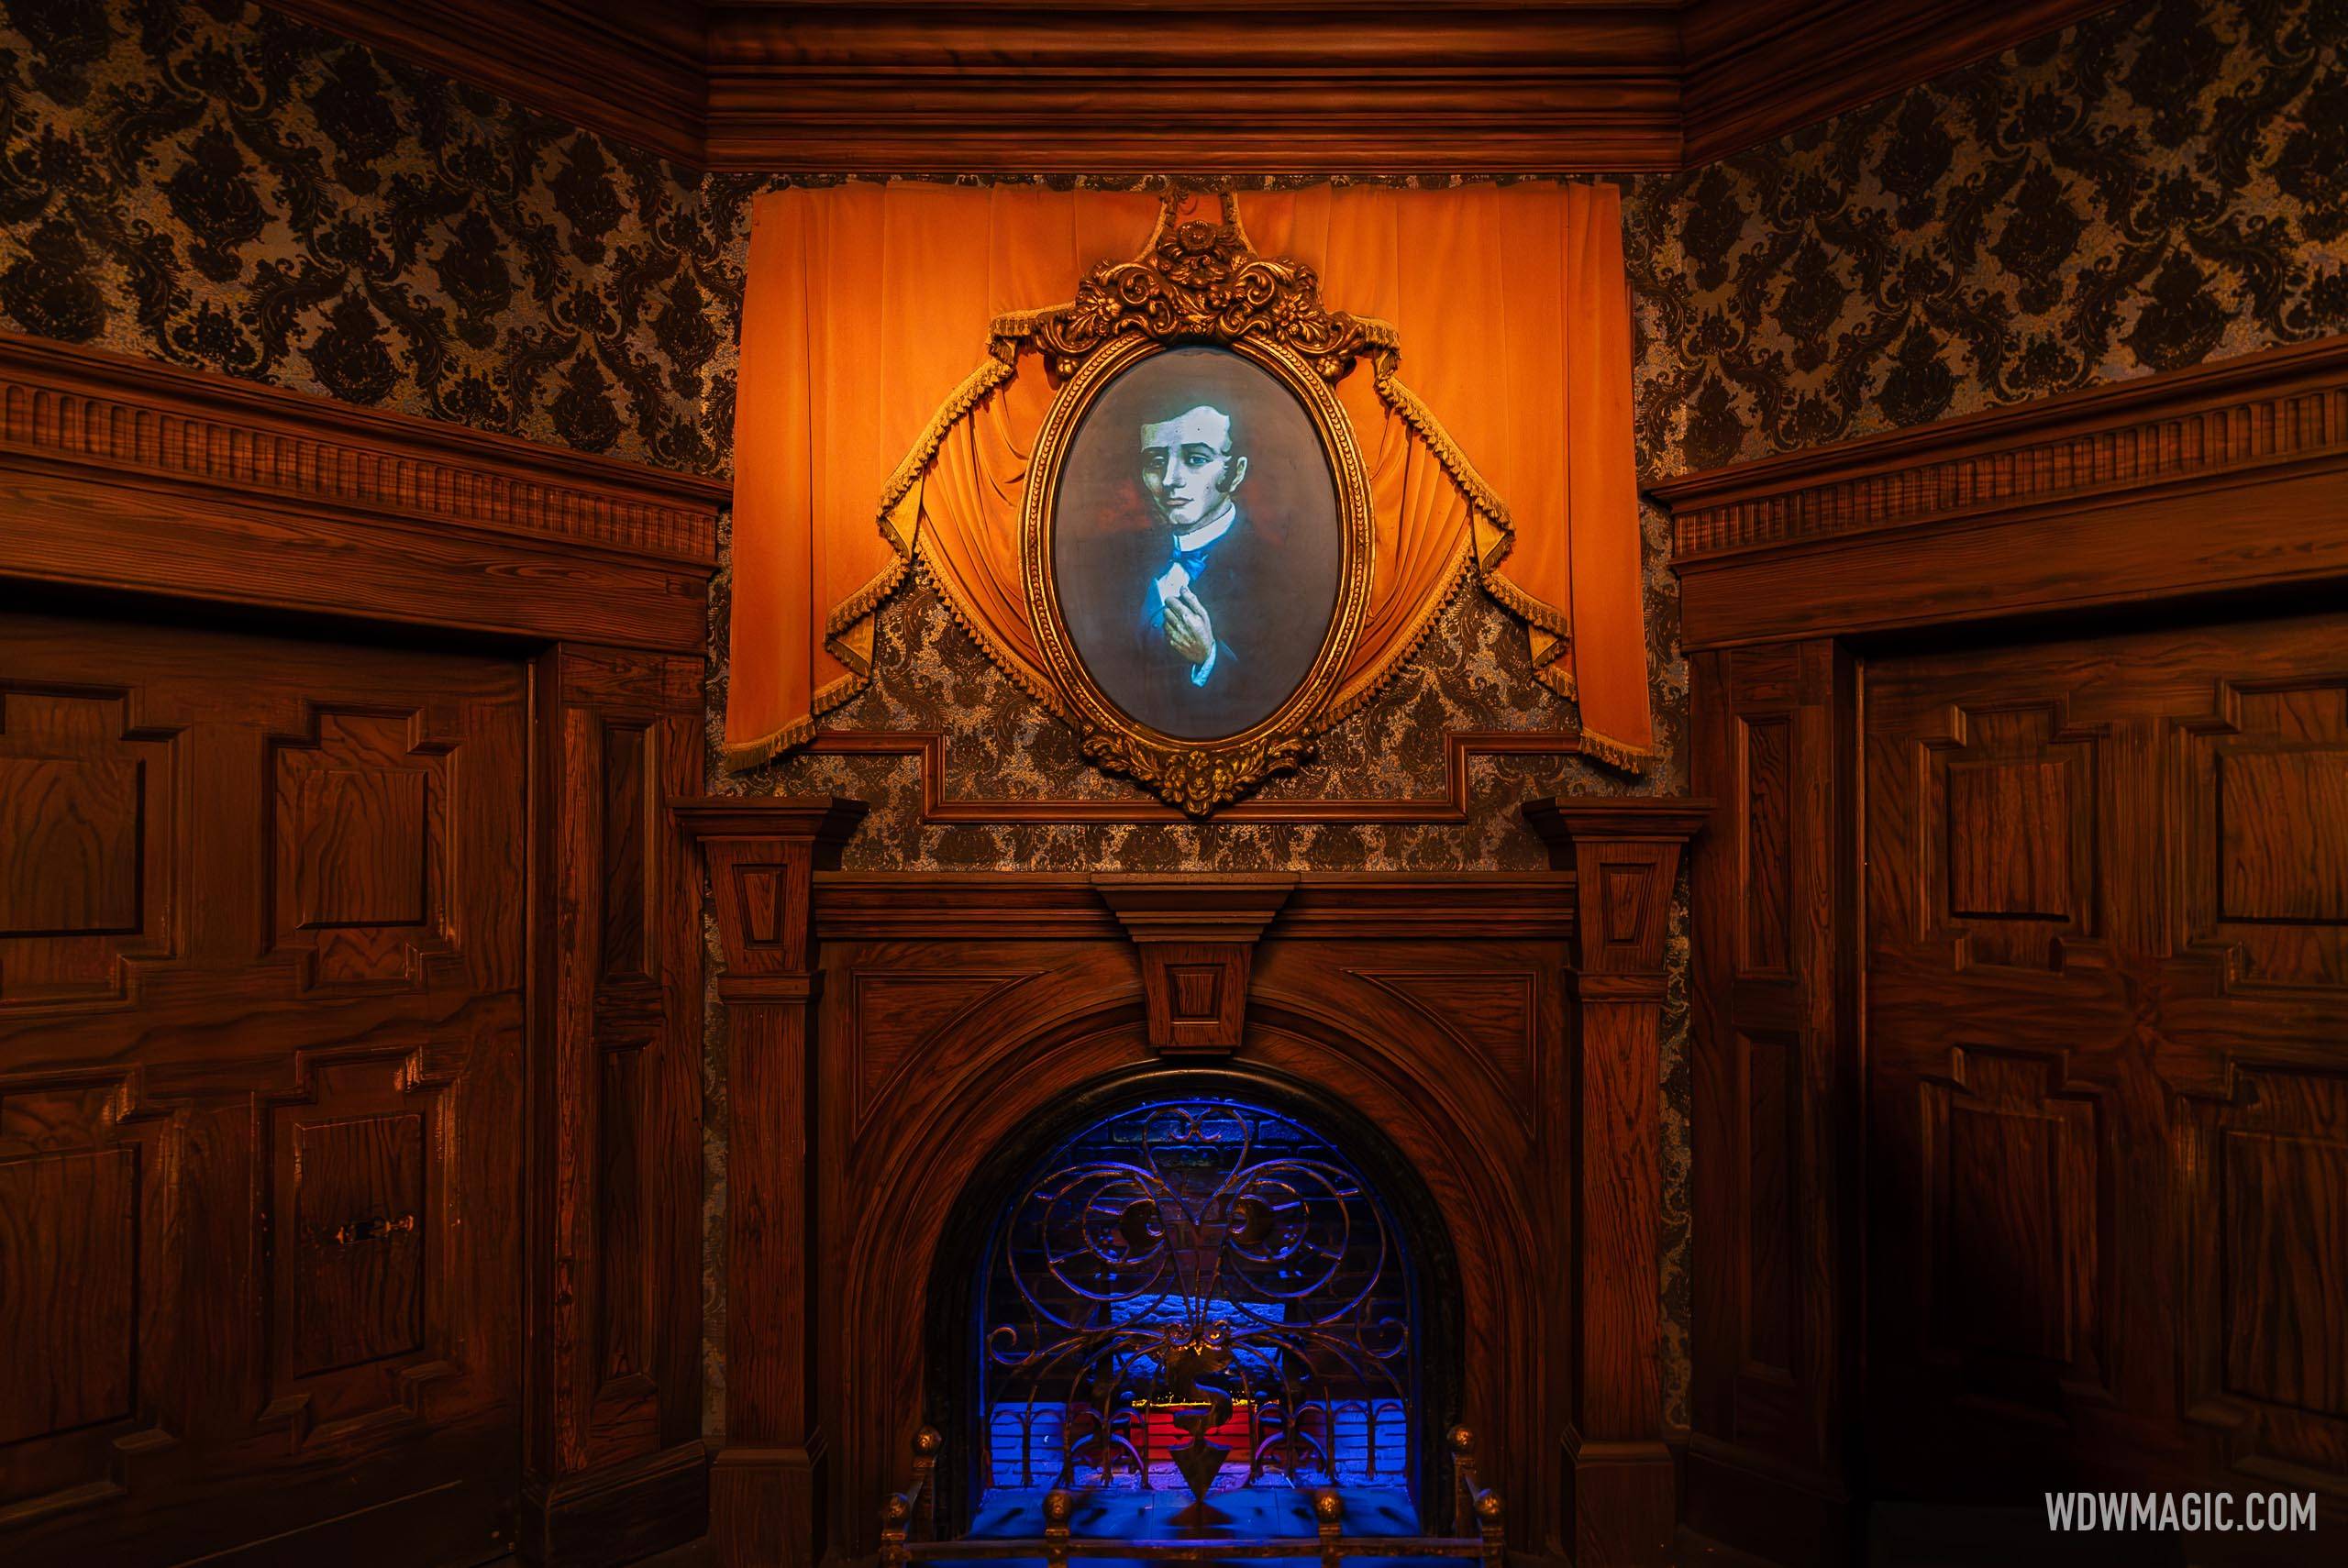 Haunted Mansion to close for refurbishment in August at Walt Disney World